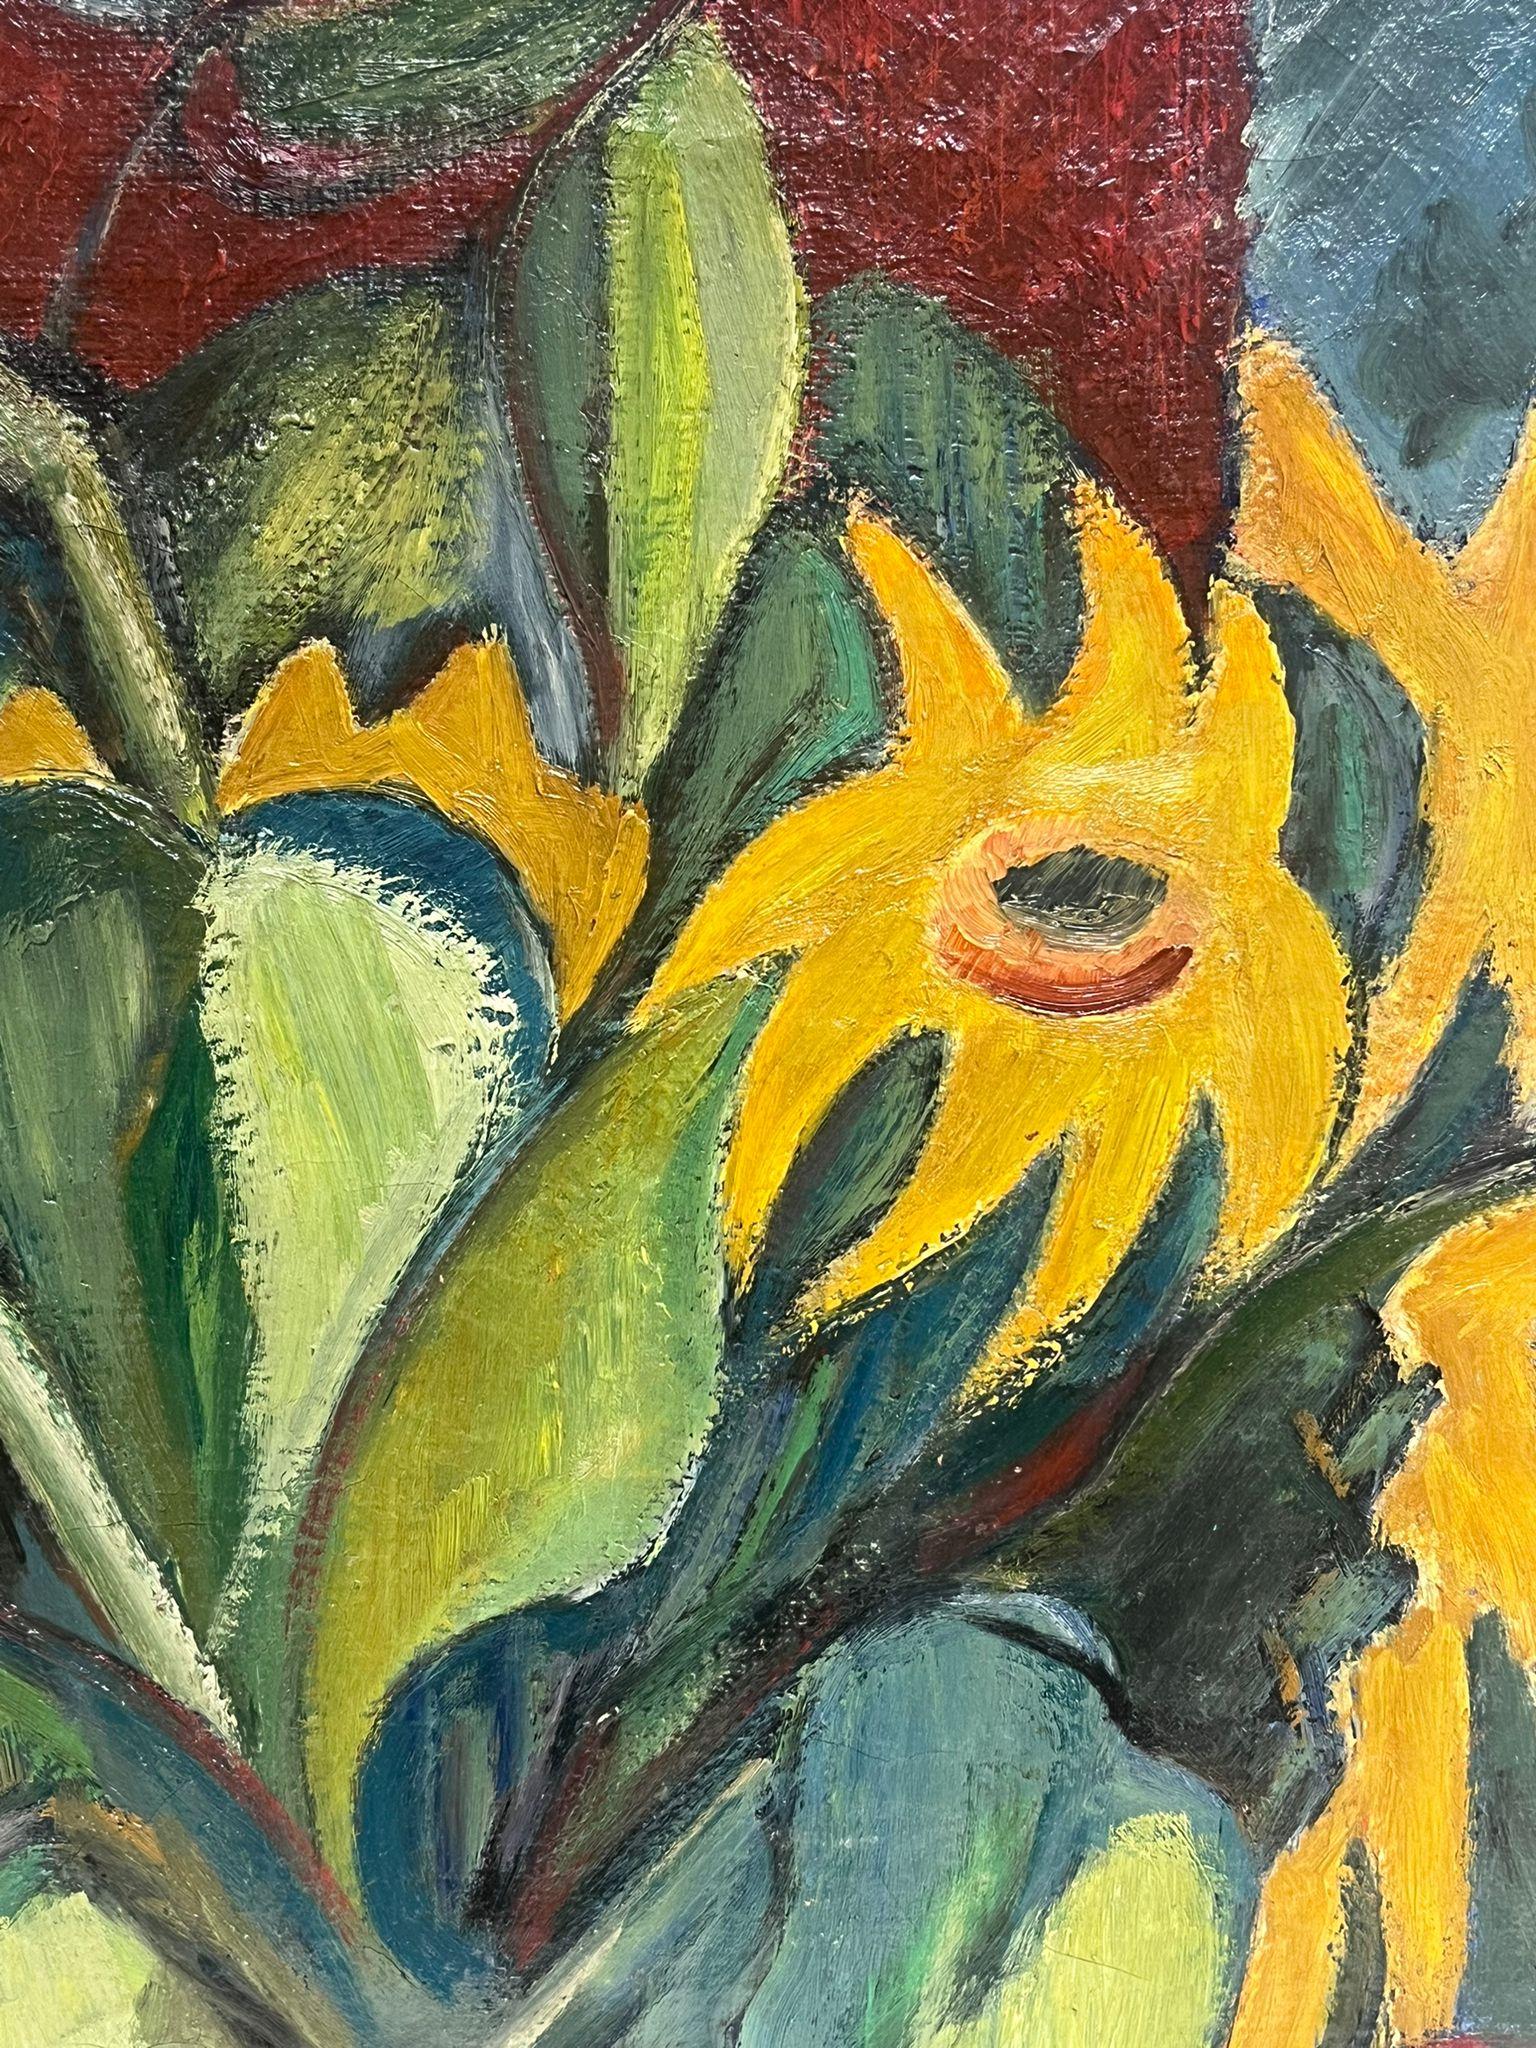 Sun Flowers in Vase
French School, mid 20th century
indistinctly signed oil on canvas, unframed
canvas: 24 x 20 inches
provenance: private collection, France
condition: very good and sound condition 